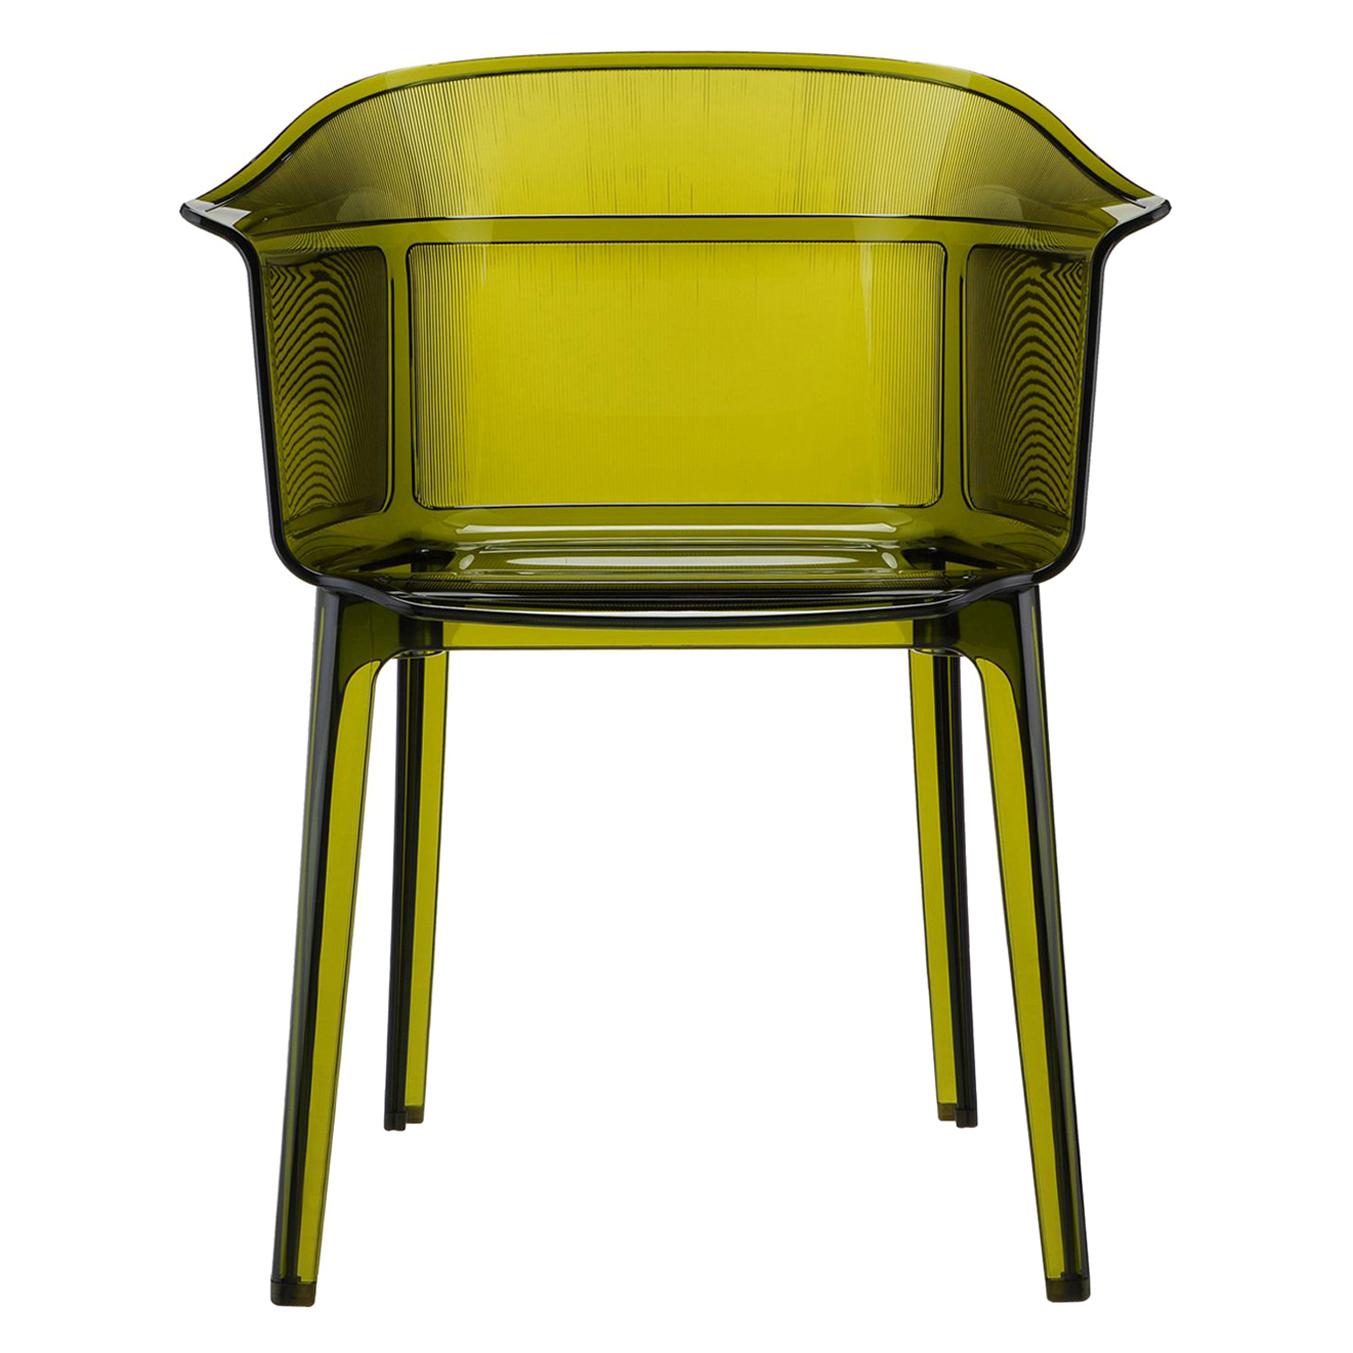 Set of 2 Kartell Papyrus Chair in Olive Green by Ronan & Erwan Bouroullec